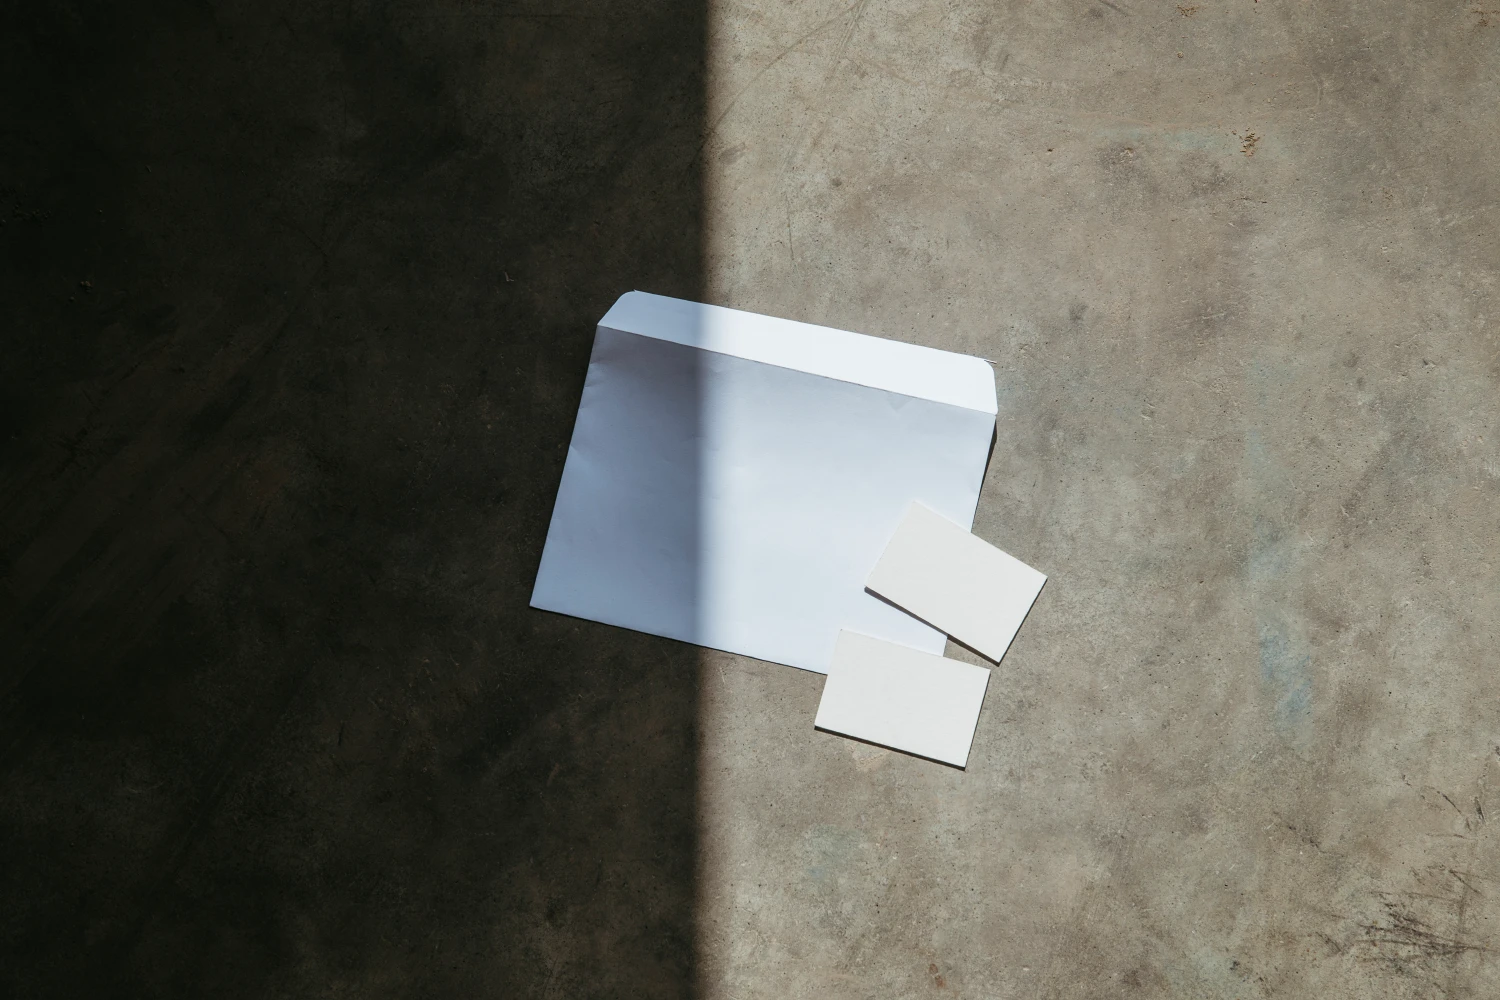 Stationery mockup placed in the groundfloor with a strong contrast between light and shadows.